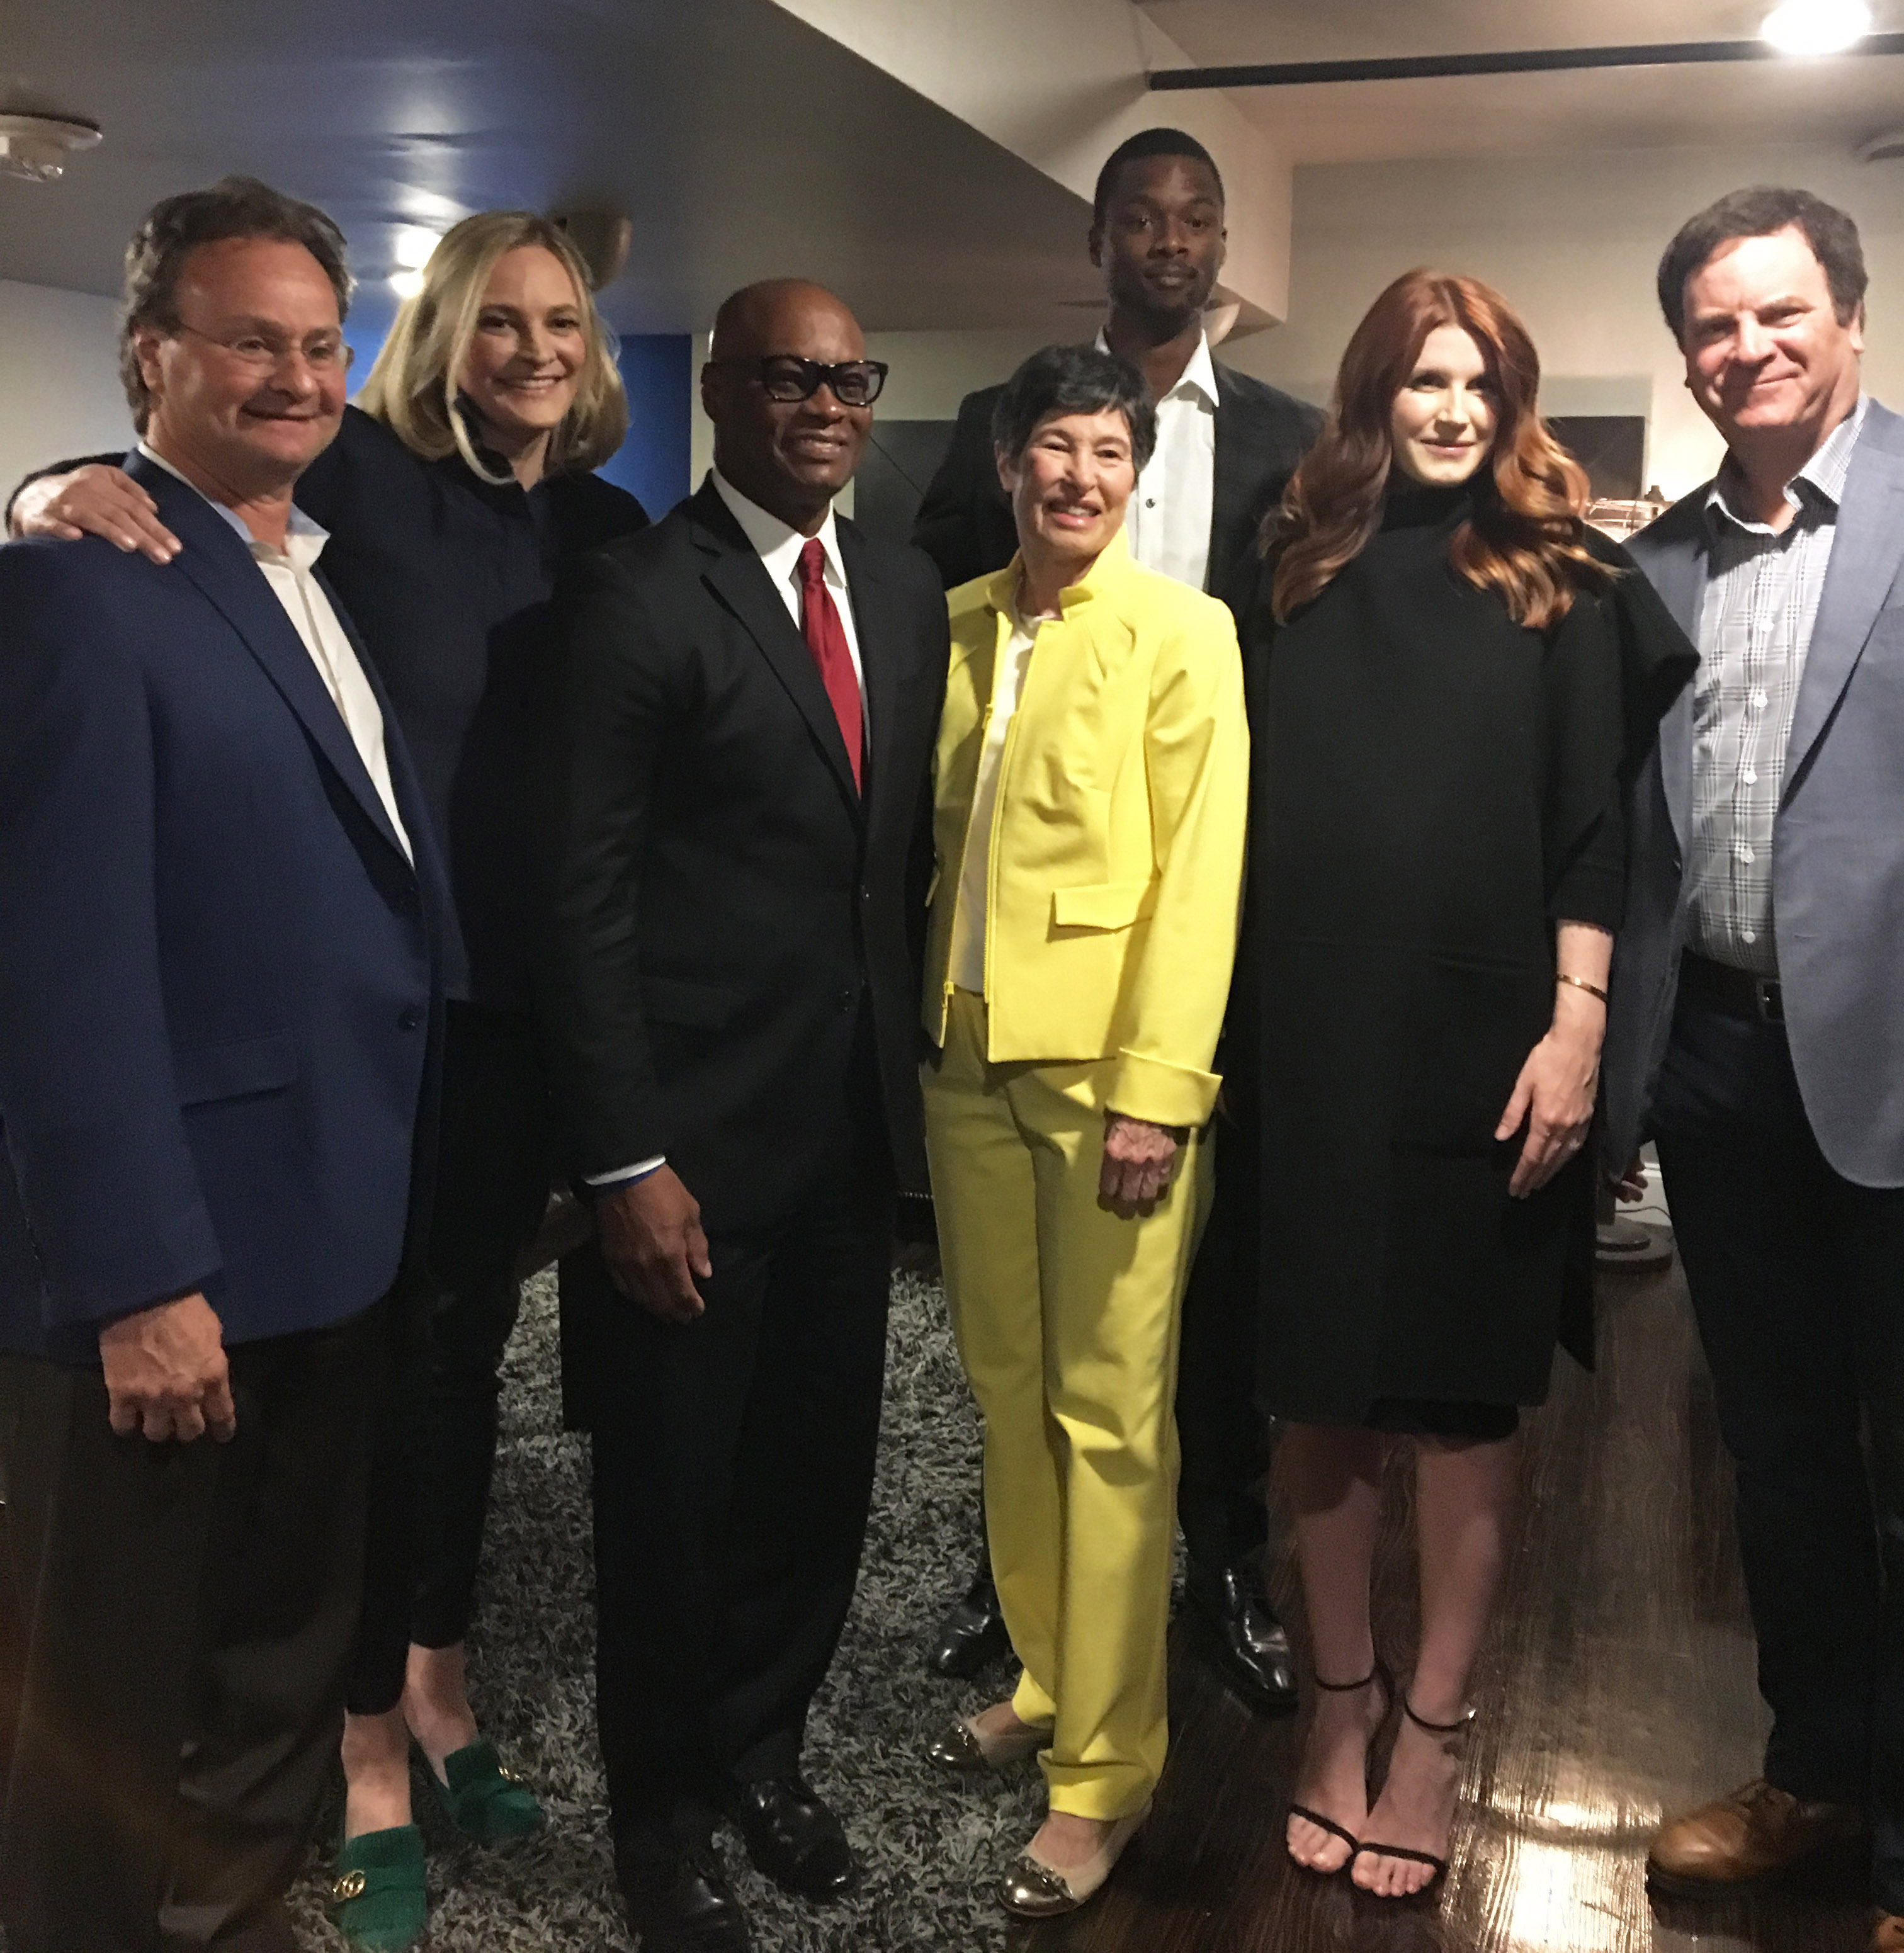 Emcee Ken Barth, United Way CEO Jennifer Sampson, former Dallas Police Chief David Brown, philanthropist Lyda Hill, Dallas Maverick Harrison Barnes, rewardStyle co-founder Amber Venz Box, and Broadcast.com co-founder Todd Wagner came together Thursday evening for OneUp the Pitch.